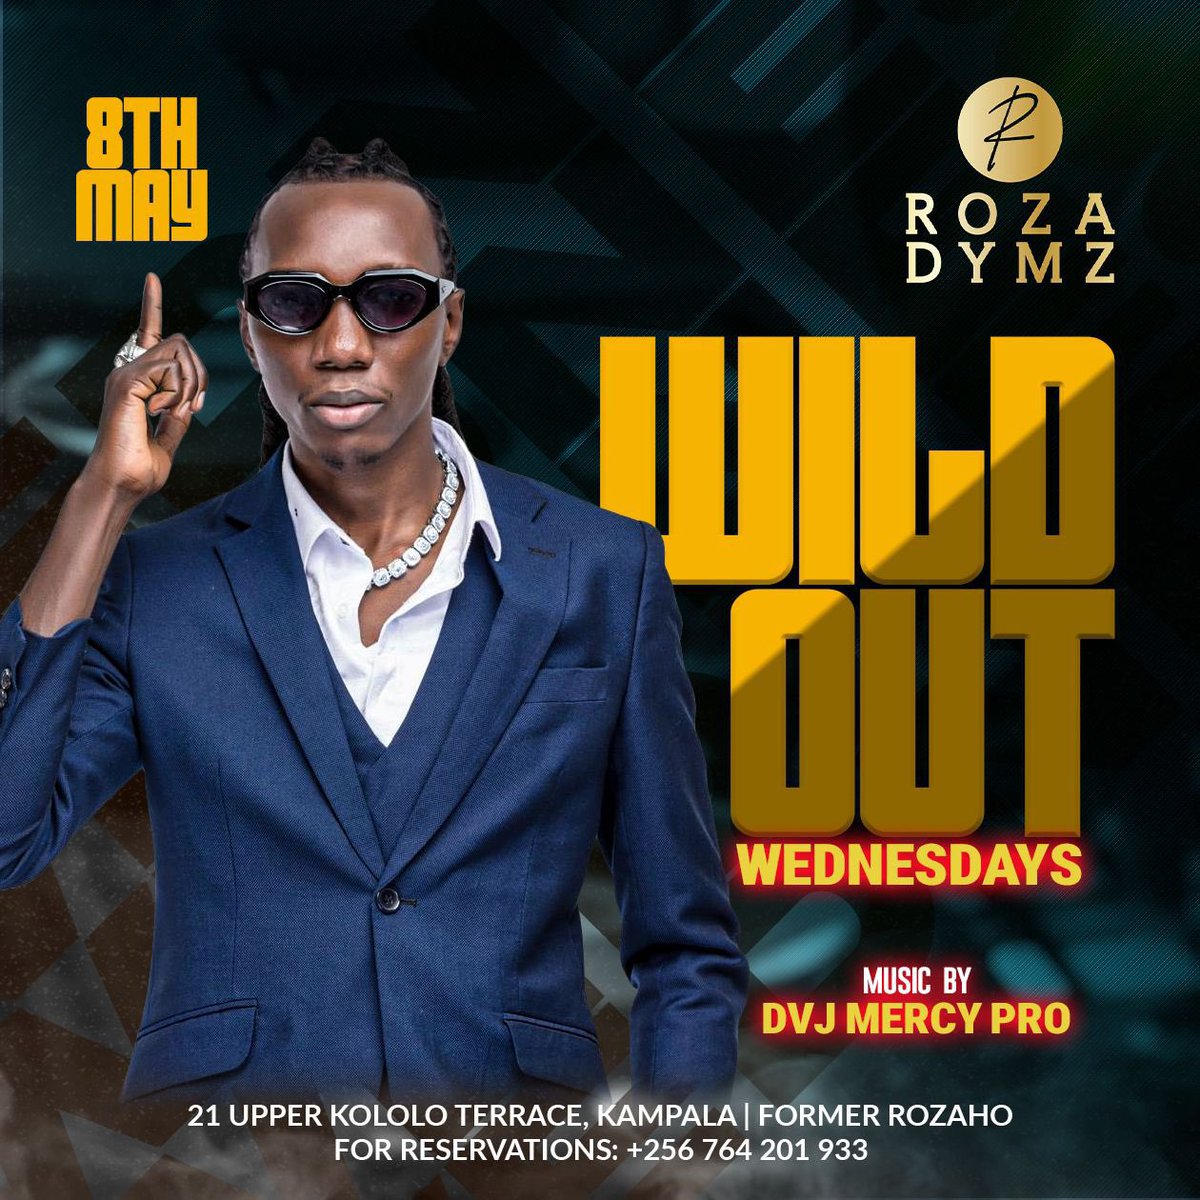 Are you all ready to Wild Out tonight? @dvjmercypro will be turning it up at @RozaDymz later today. For Reservations: +256 764 201 933 📍 21 Upper Kololo Terrace, Kampala #RozaDymzKLA